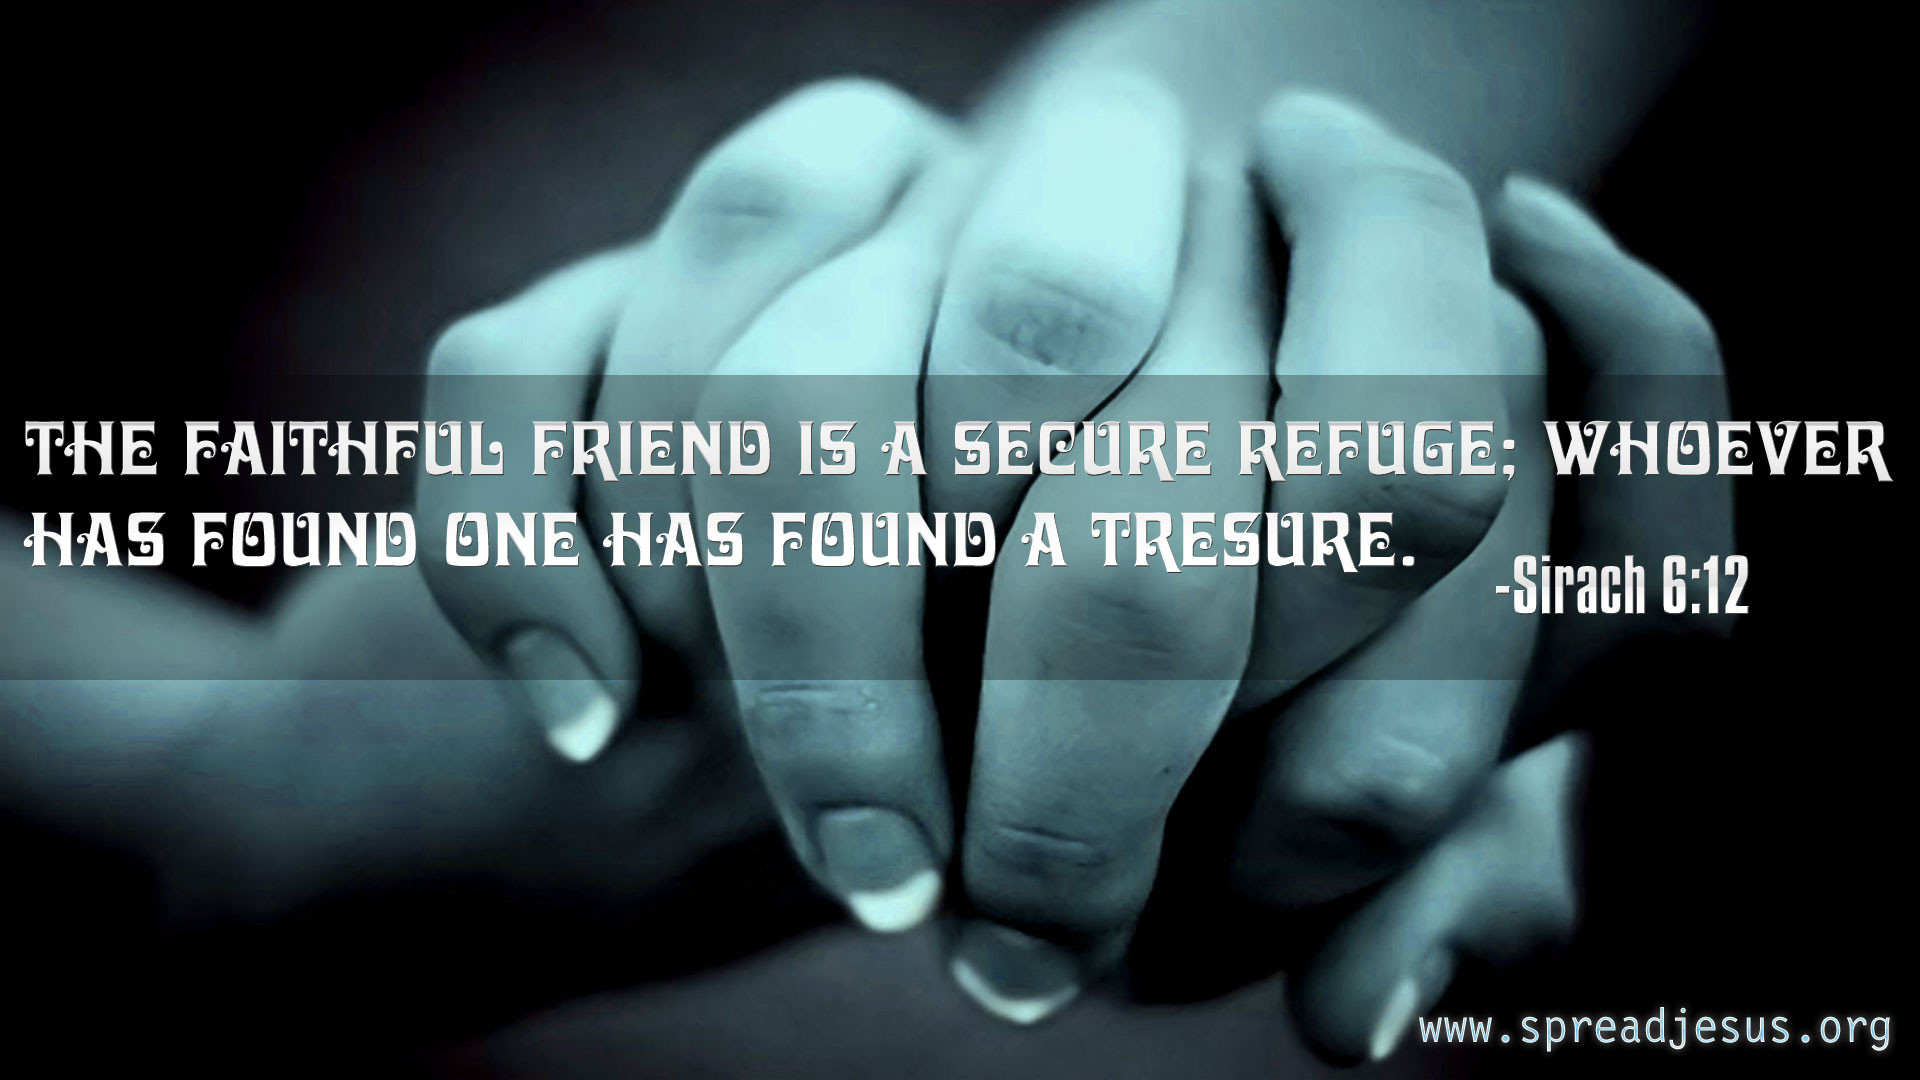 Bible Quotes About Friendship
 Quotes About Friendship From The Bible QuotesGram